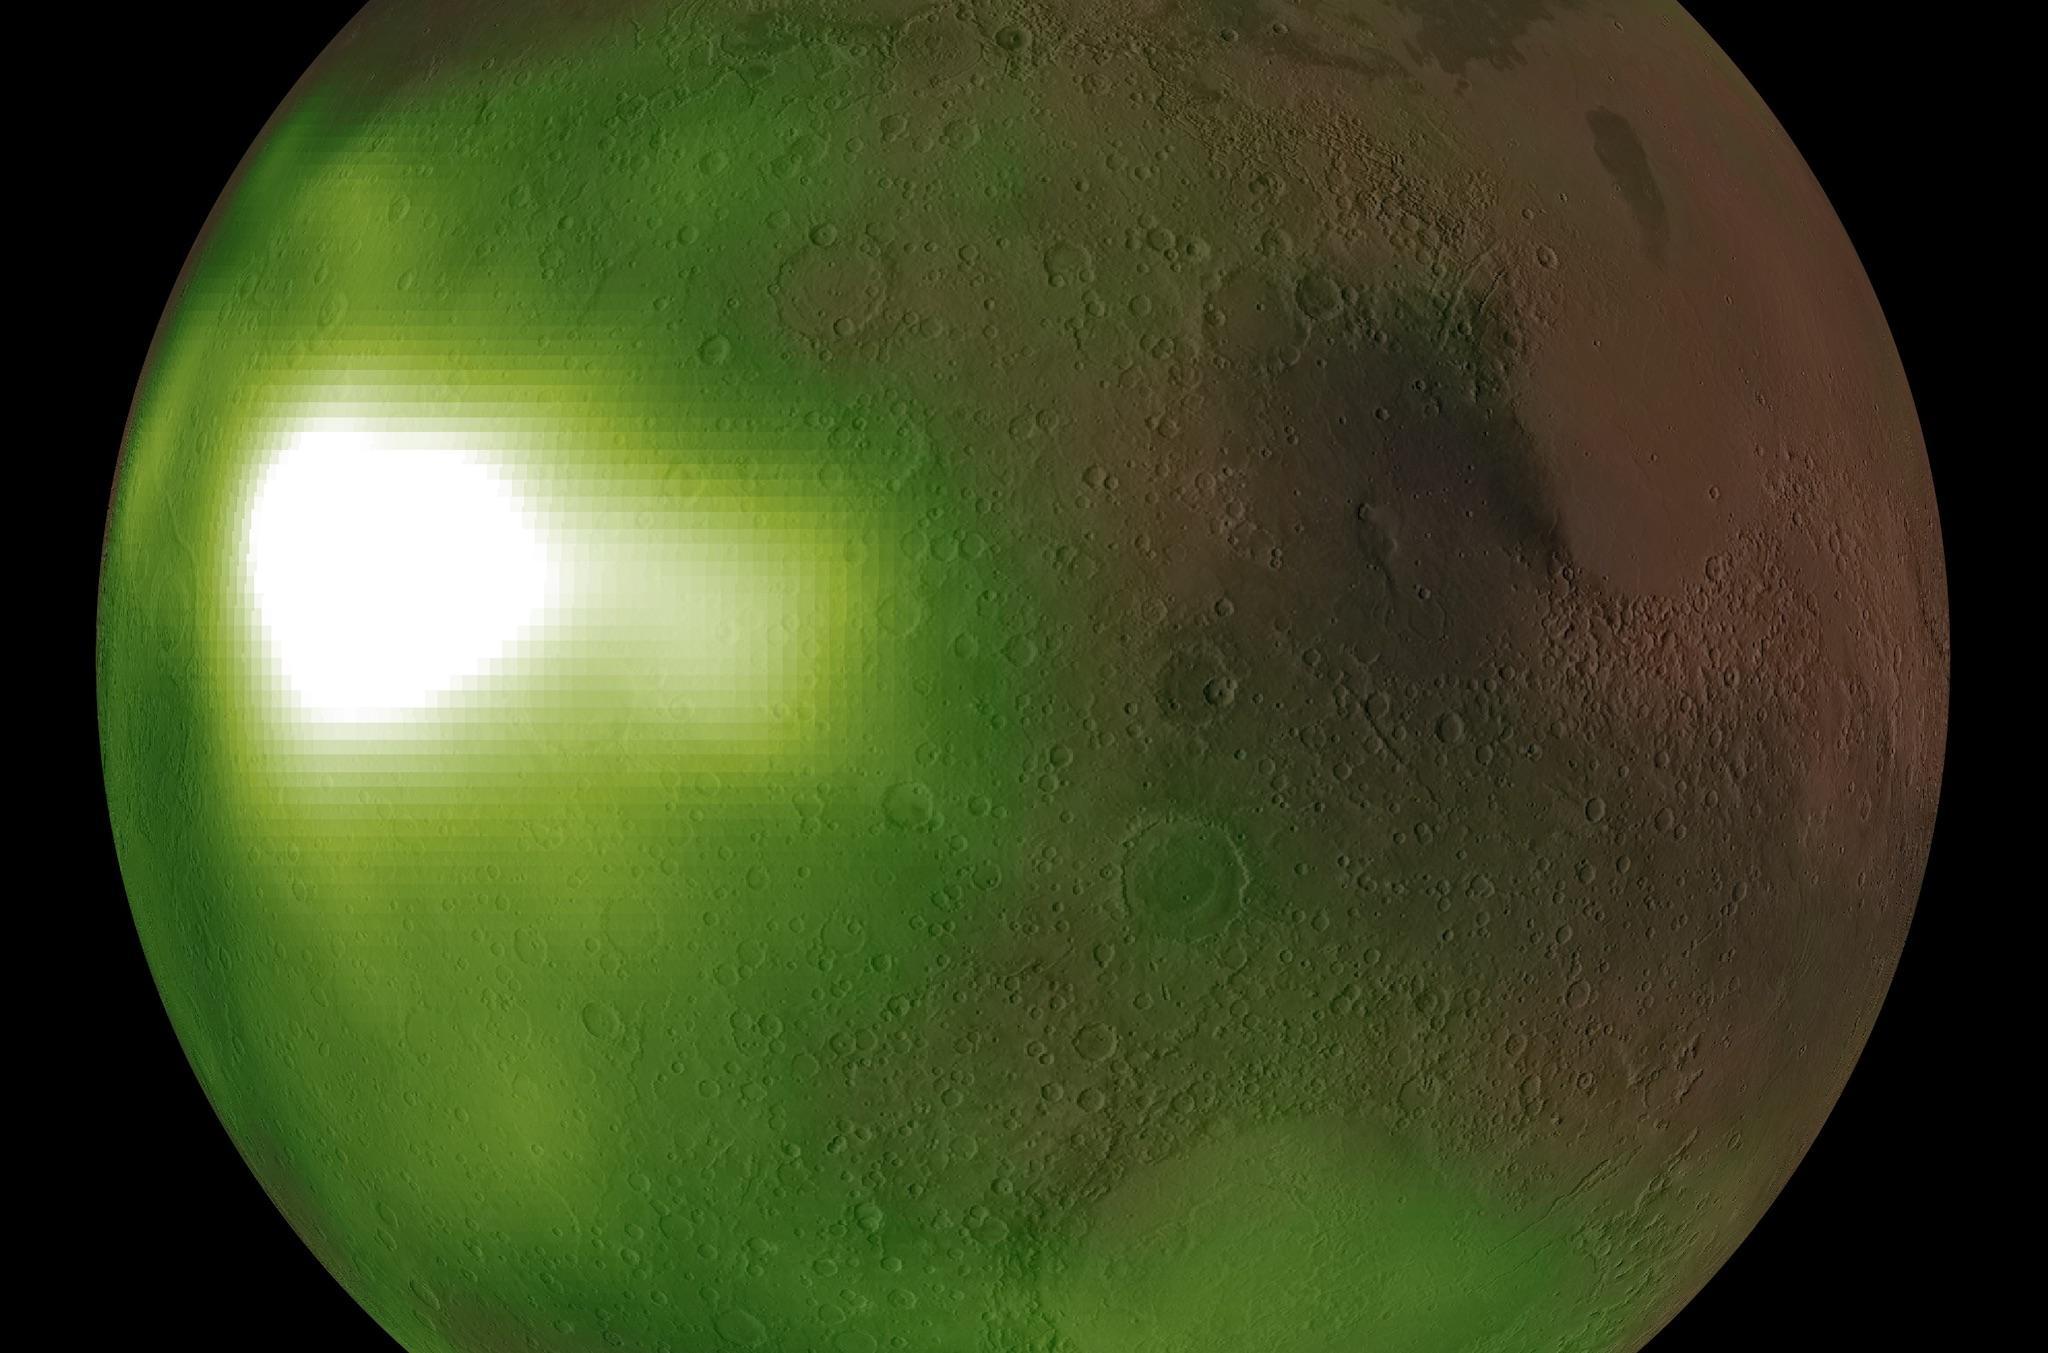 This is an image of the ultraviolet "nightglow" in the Martian atmosphere. Green and white false colors represent the intensity of ultraviolet light, with white being the brightest